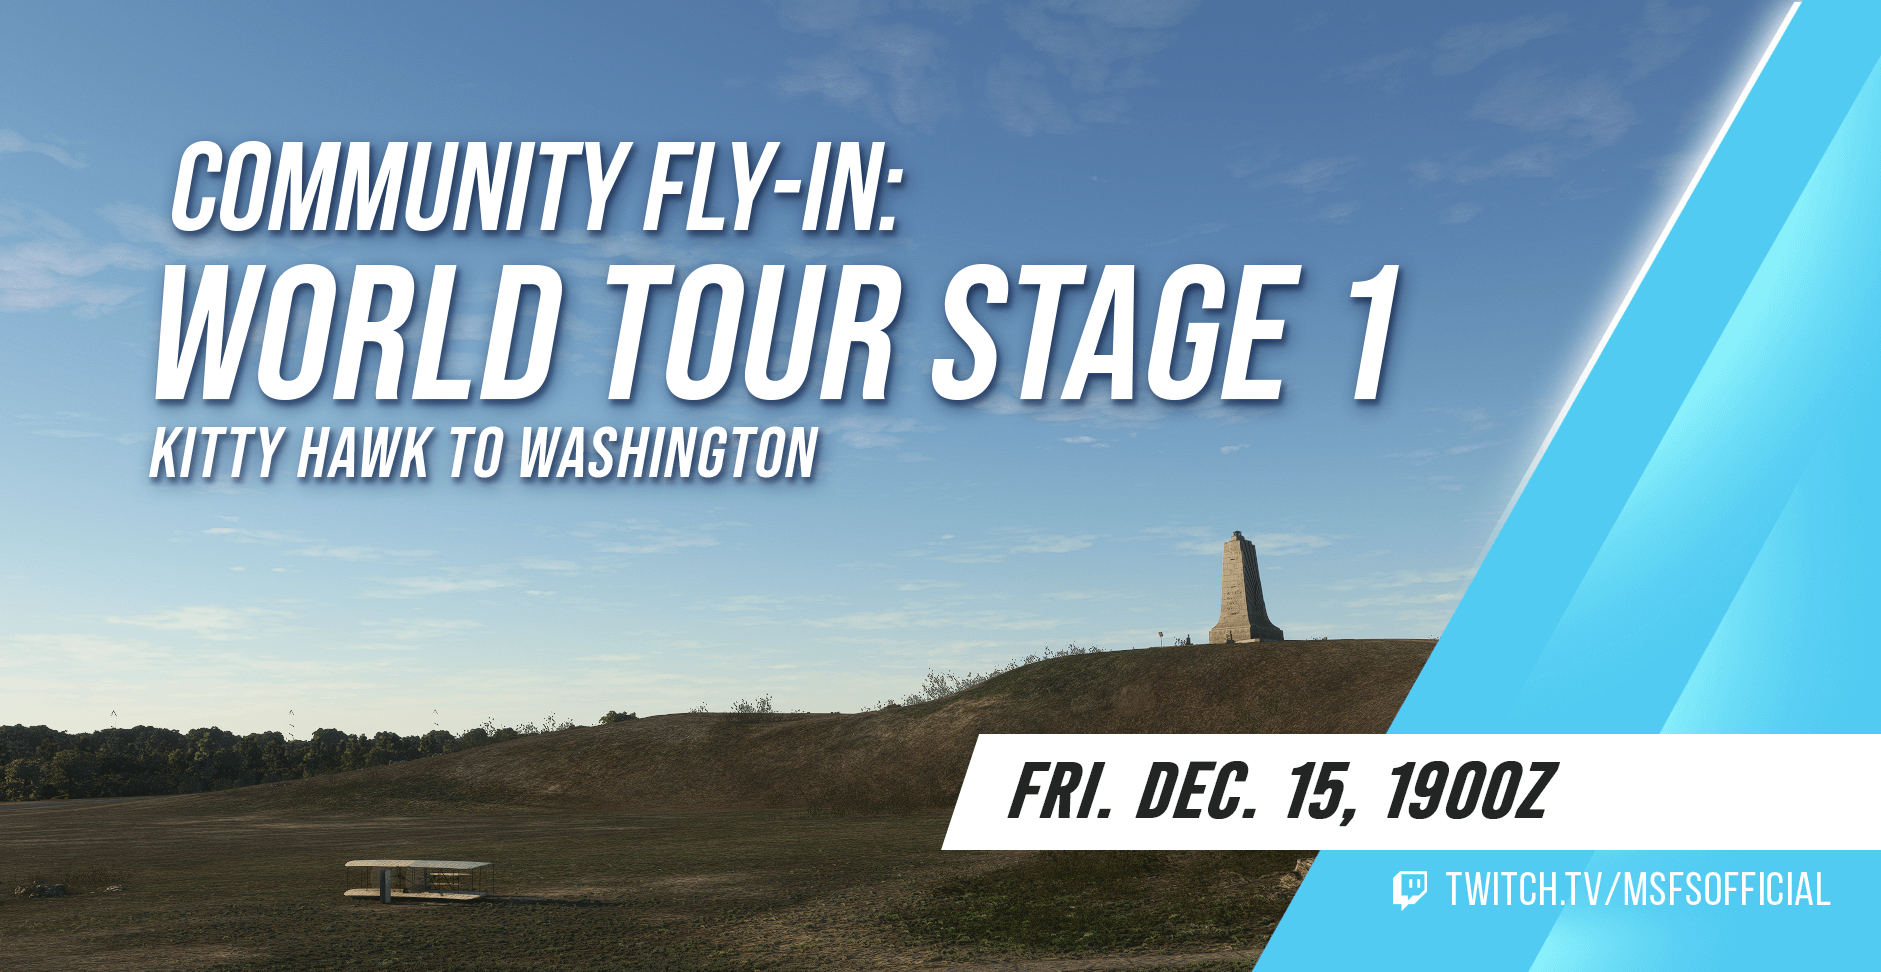 Community Fly-In: World Tour Stage 1. Friday December 15th 1900z. www.twitch.tv/msfsofficial